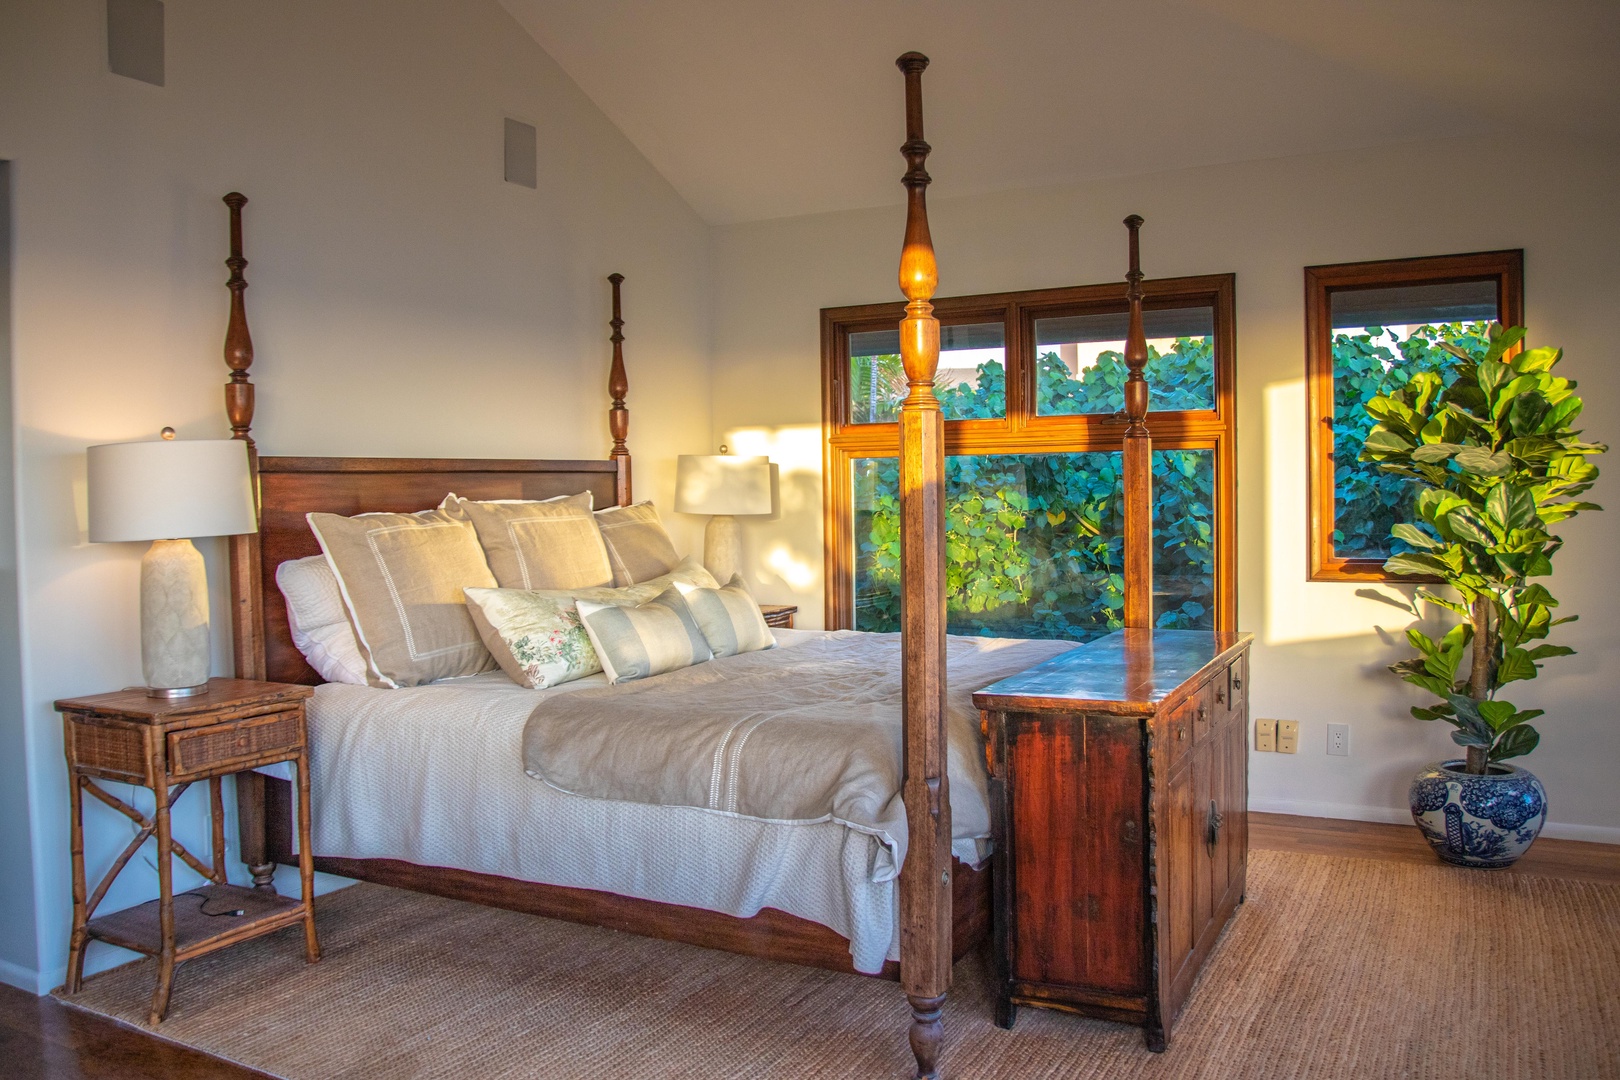 Honolulu Vacation Rentals, Kaiko'o Villa** - Ton of natural light coming in to welcome you to a new day in Paradise